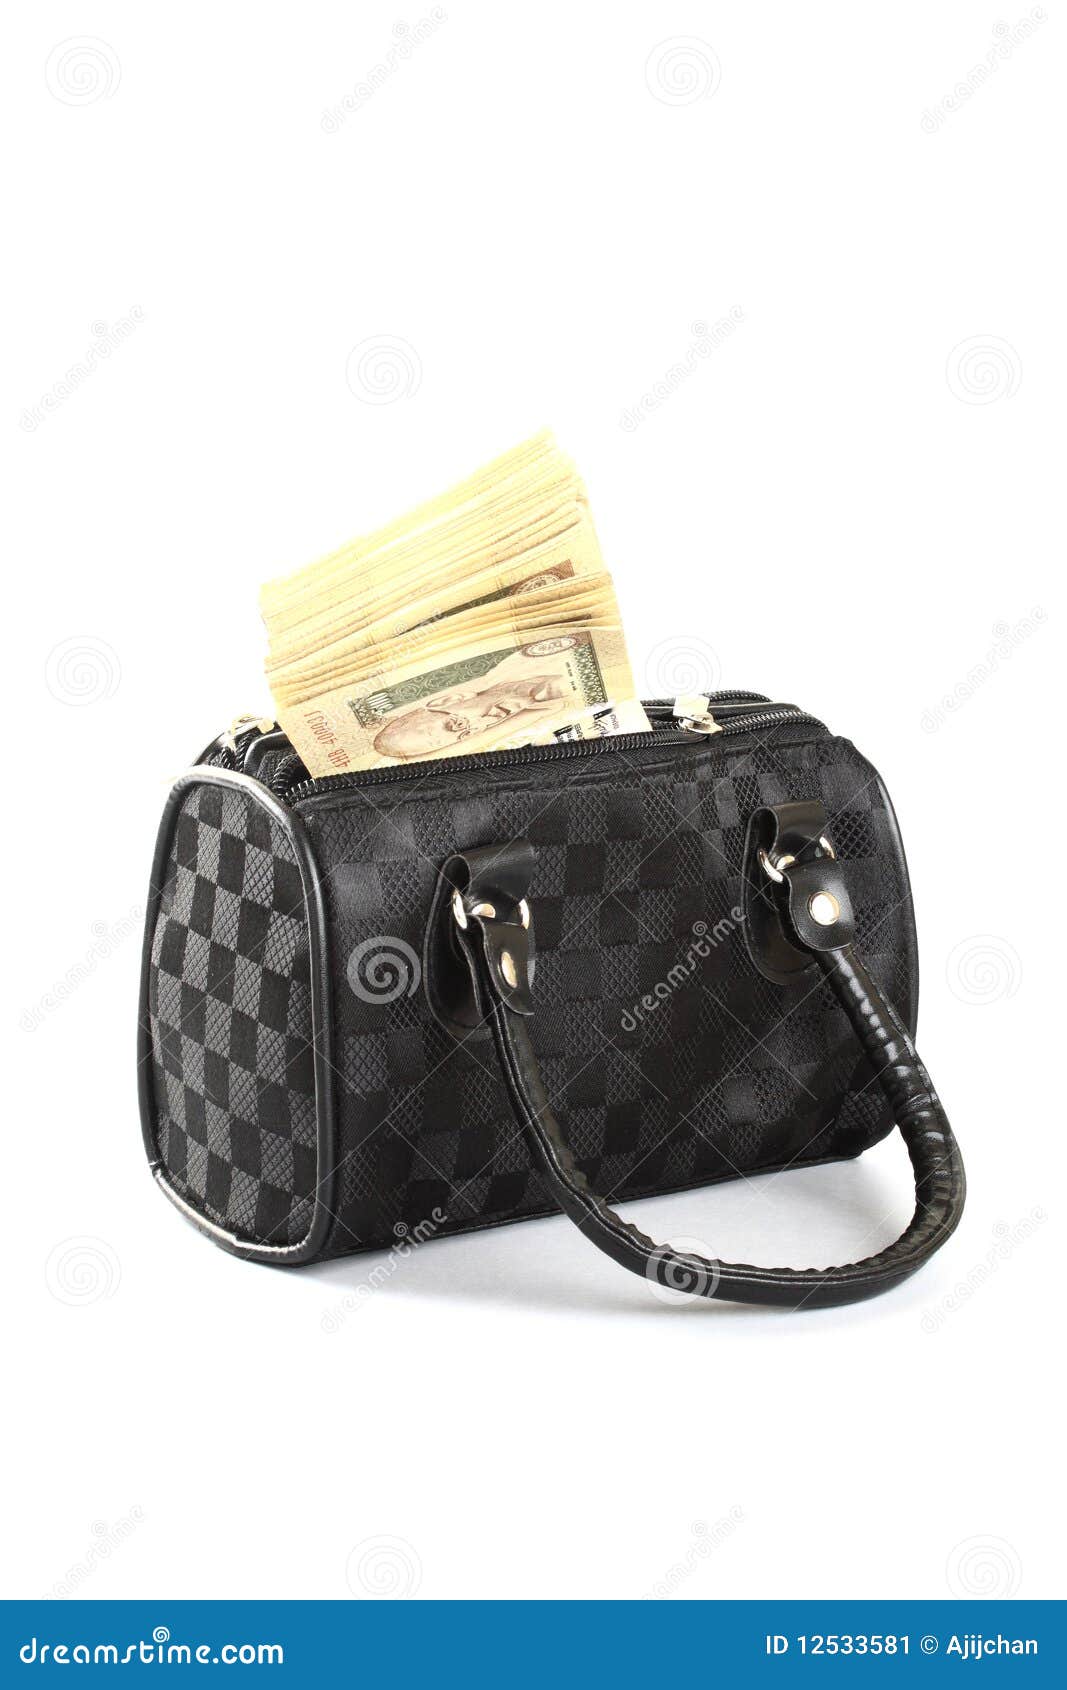 A bag full of cash stock image. Image of bags, finance - 12533581